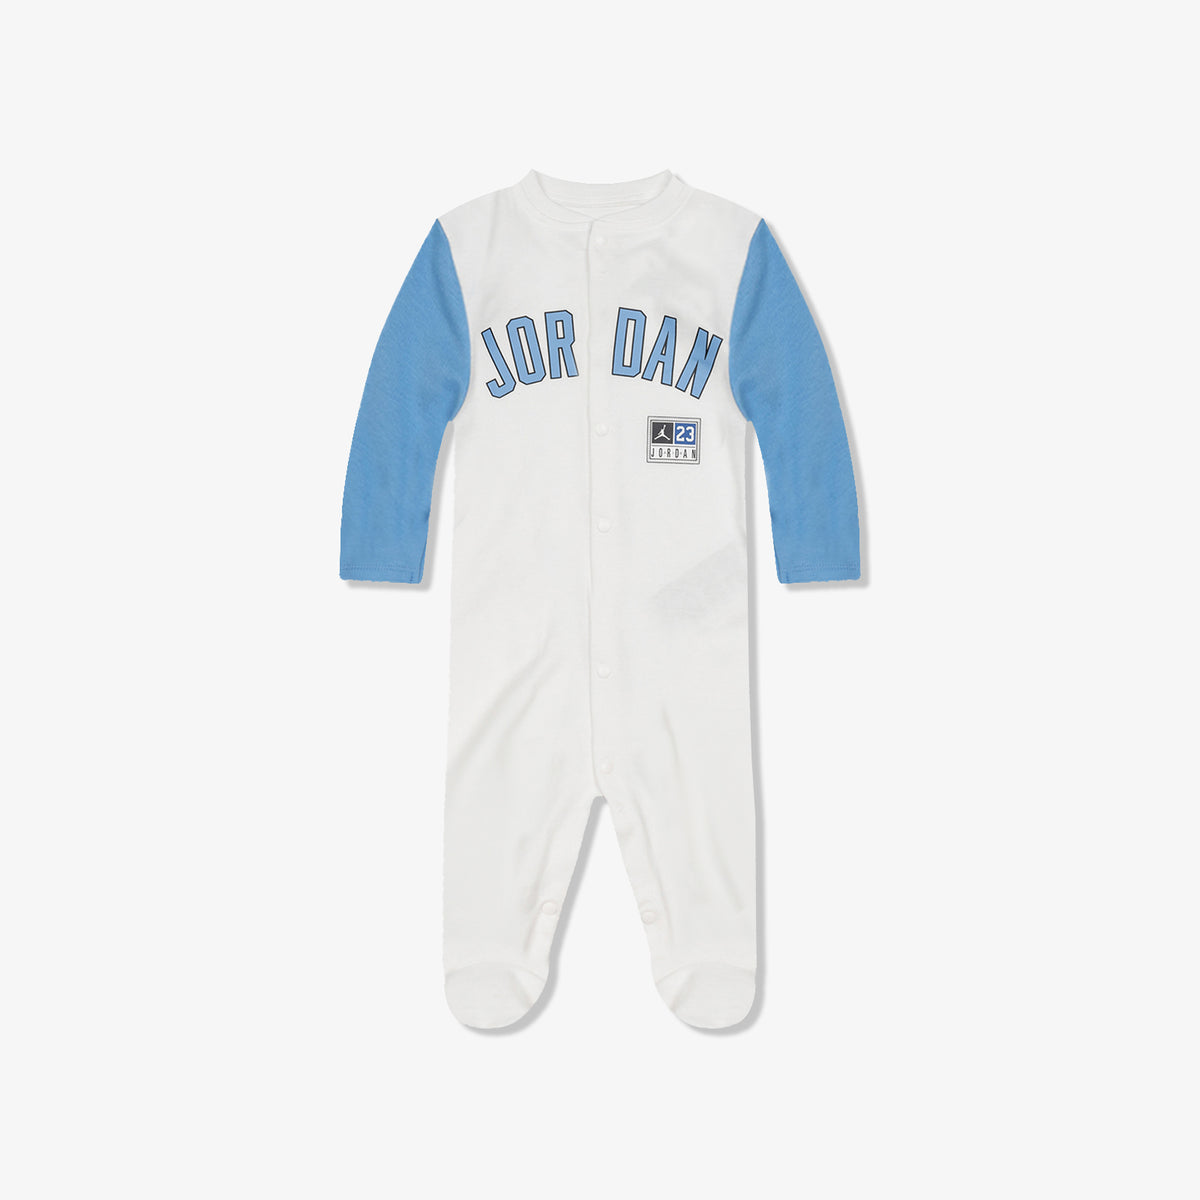 Jordan Footed Infant Coveralls - White